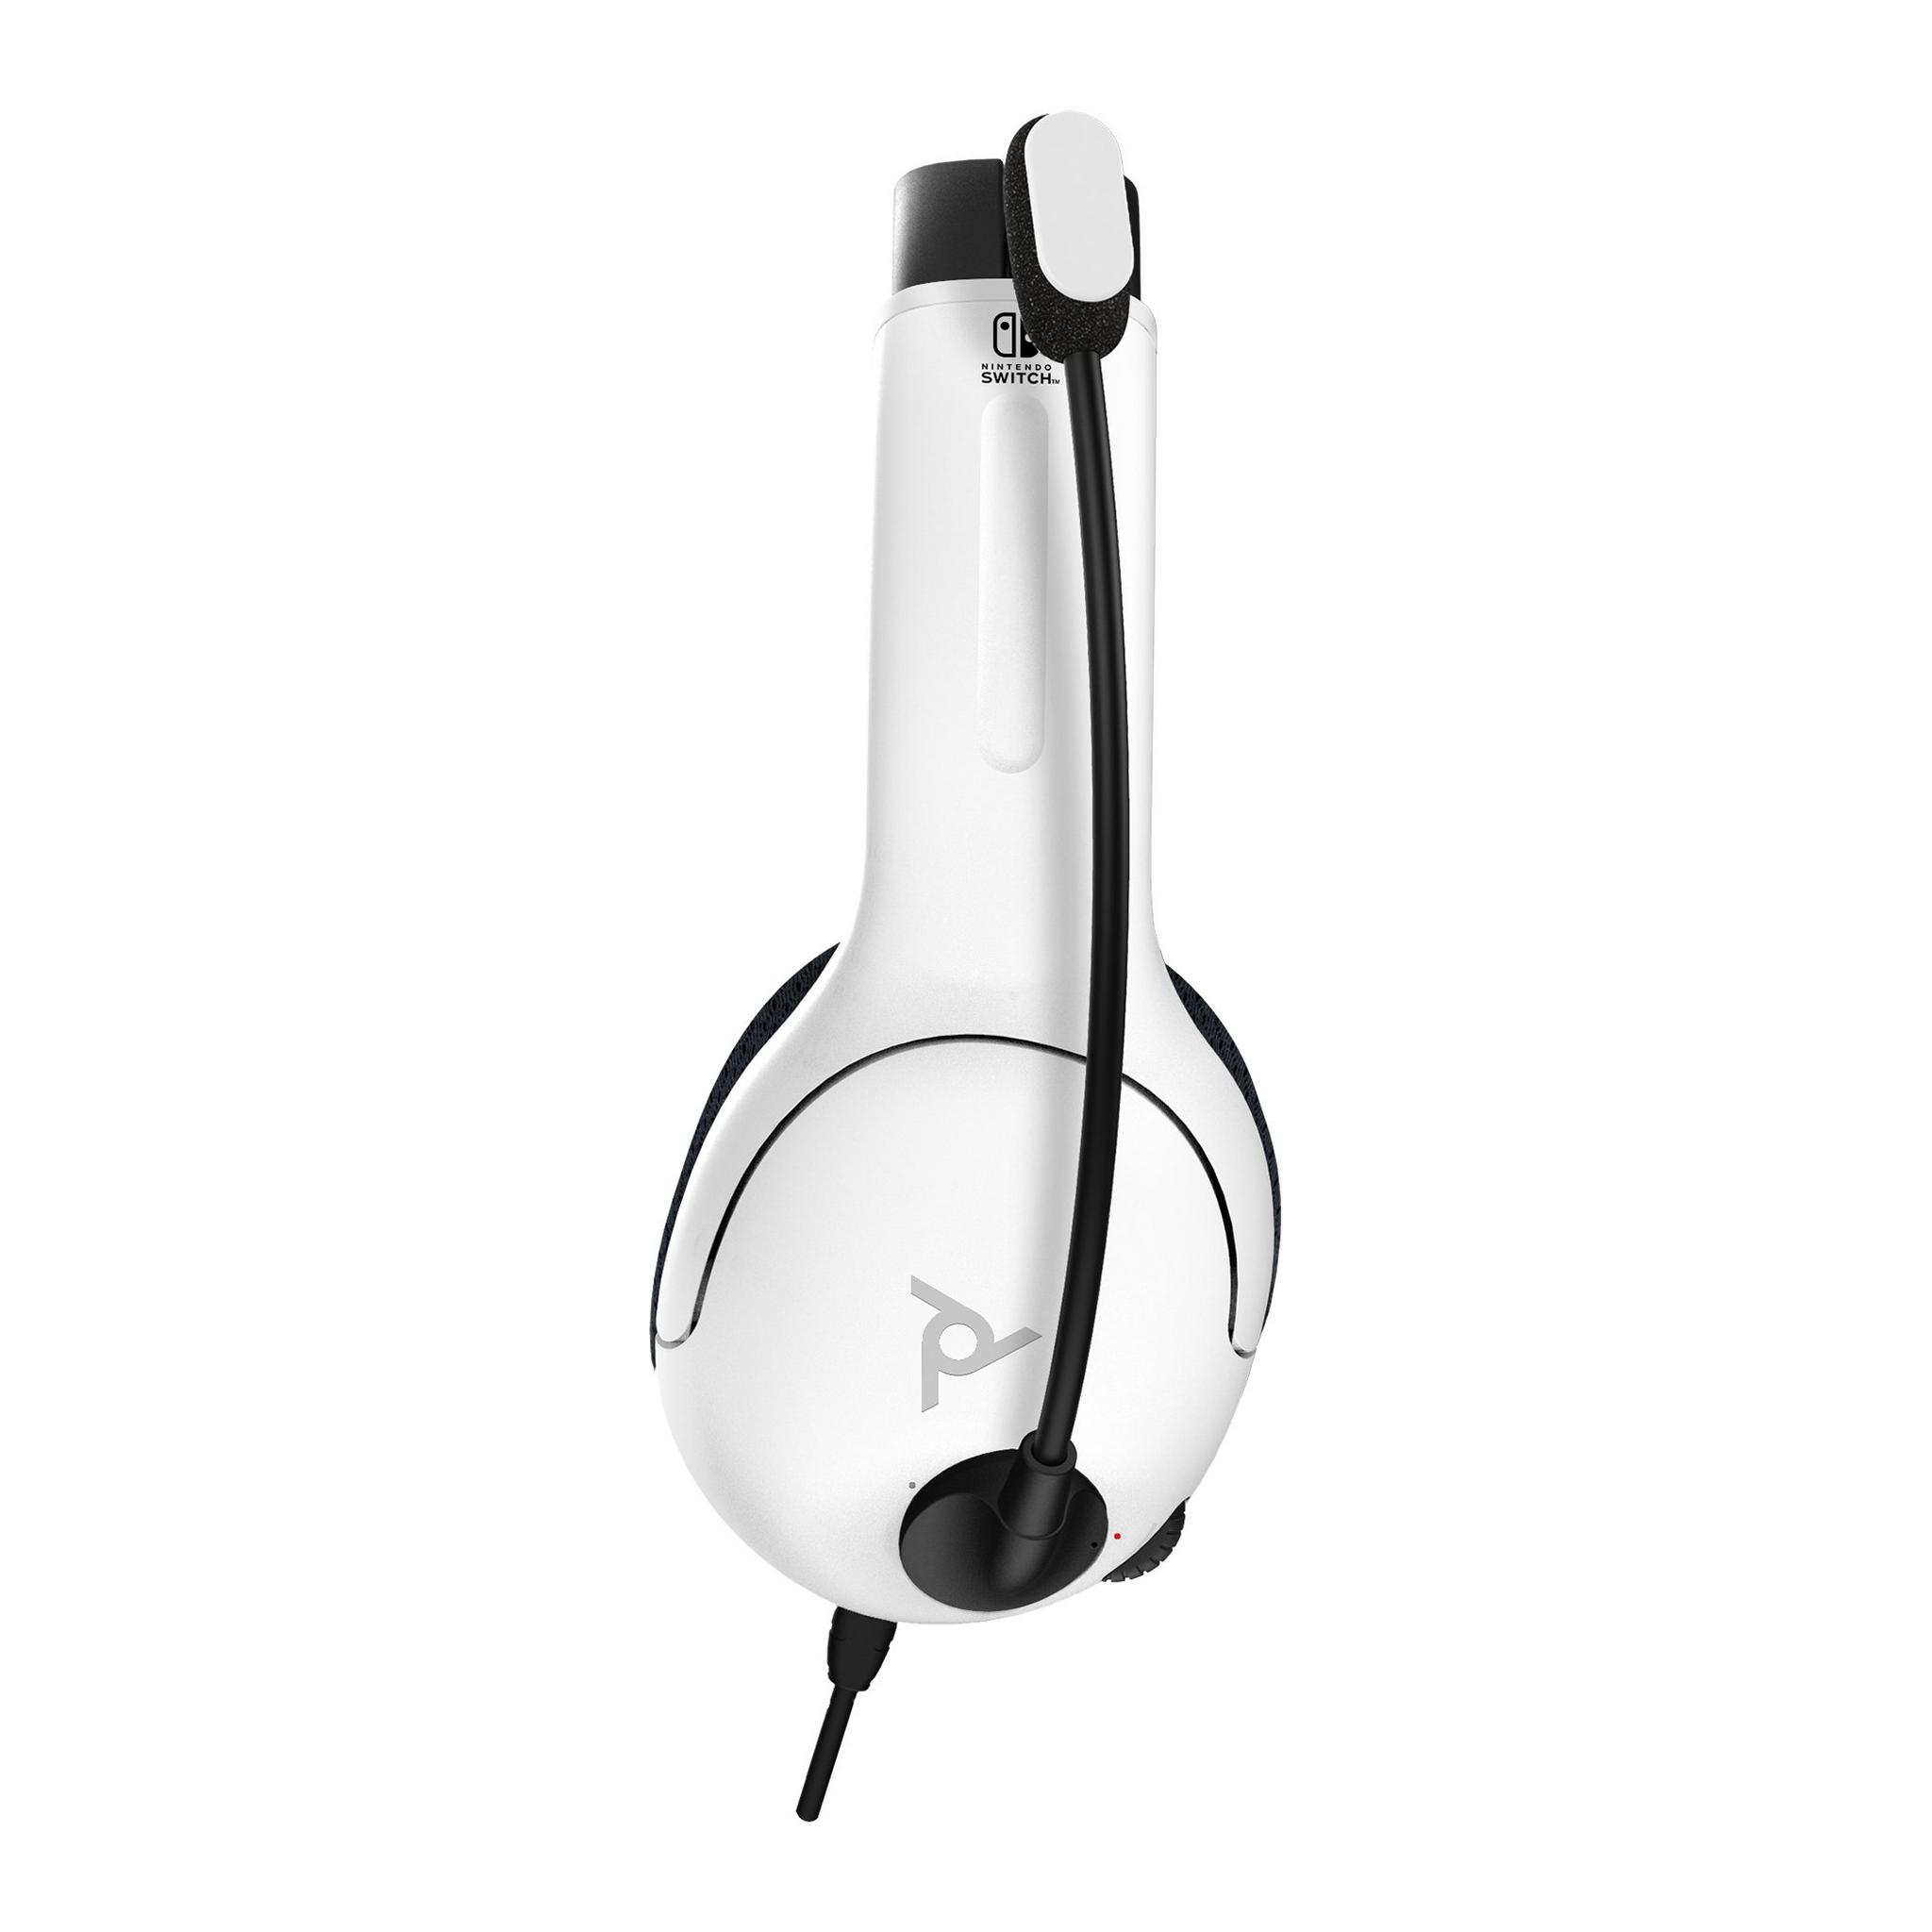 PDP LVL40 Wired Headset for Nintendo Switch - Black/White